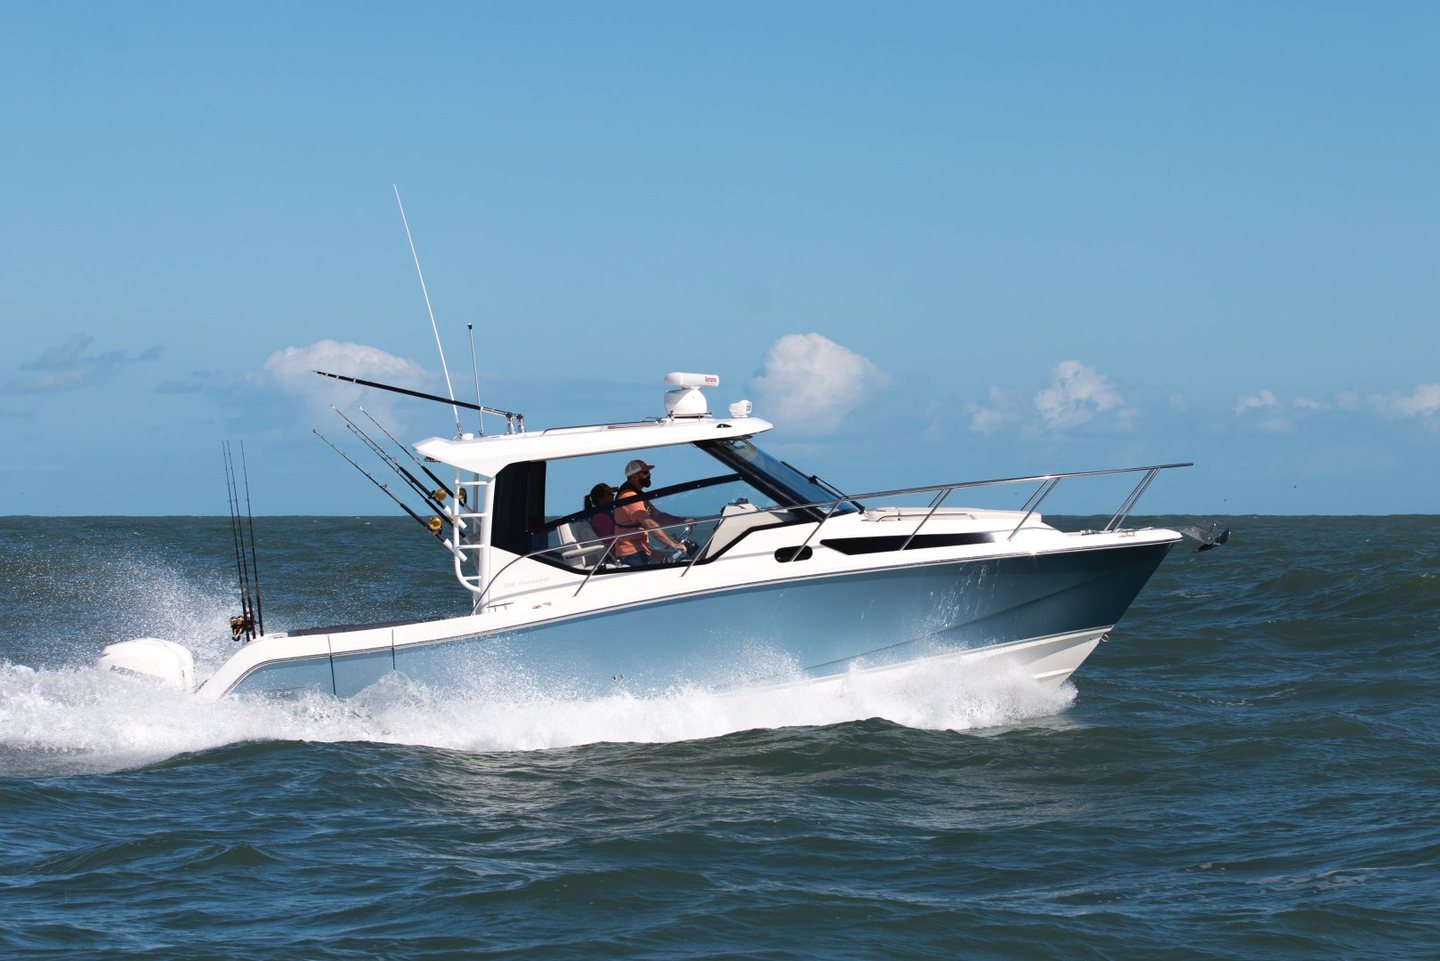 360 VR Virtual Tours of the Boston Whaler 325 Conquest